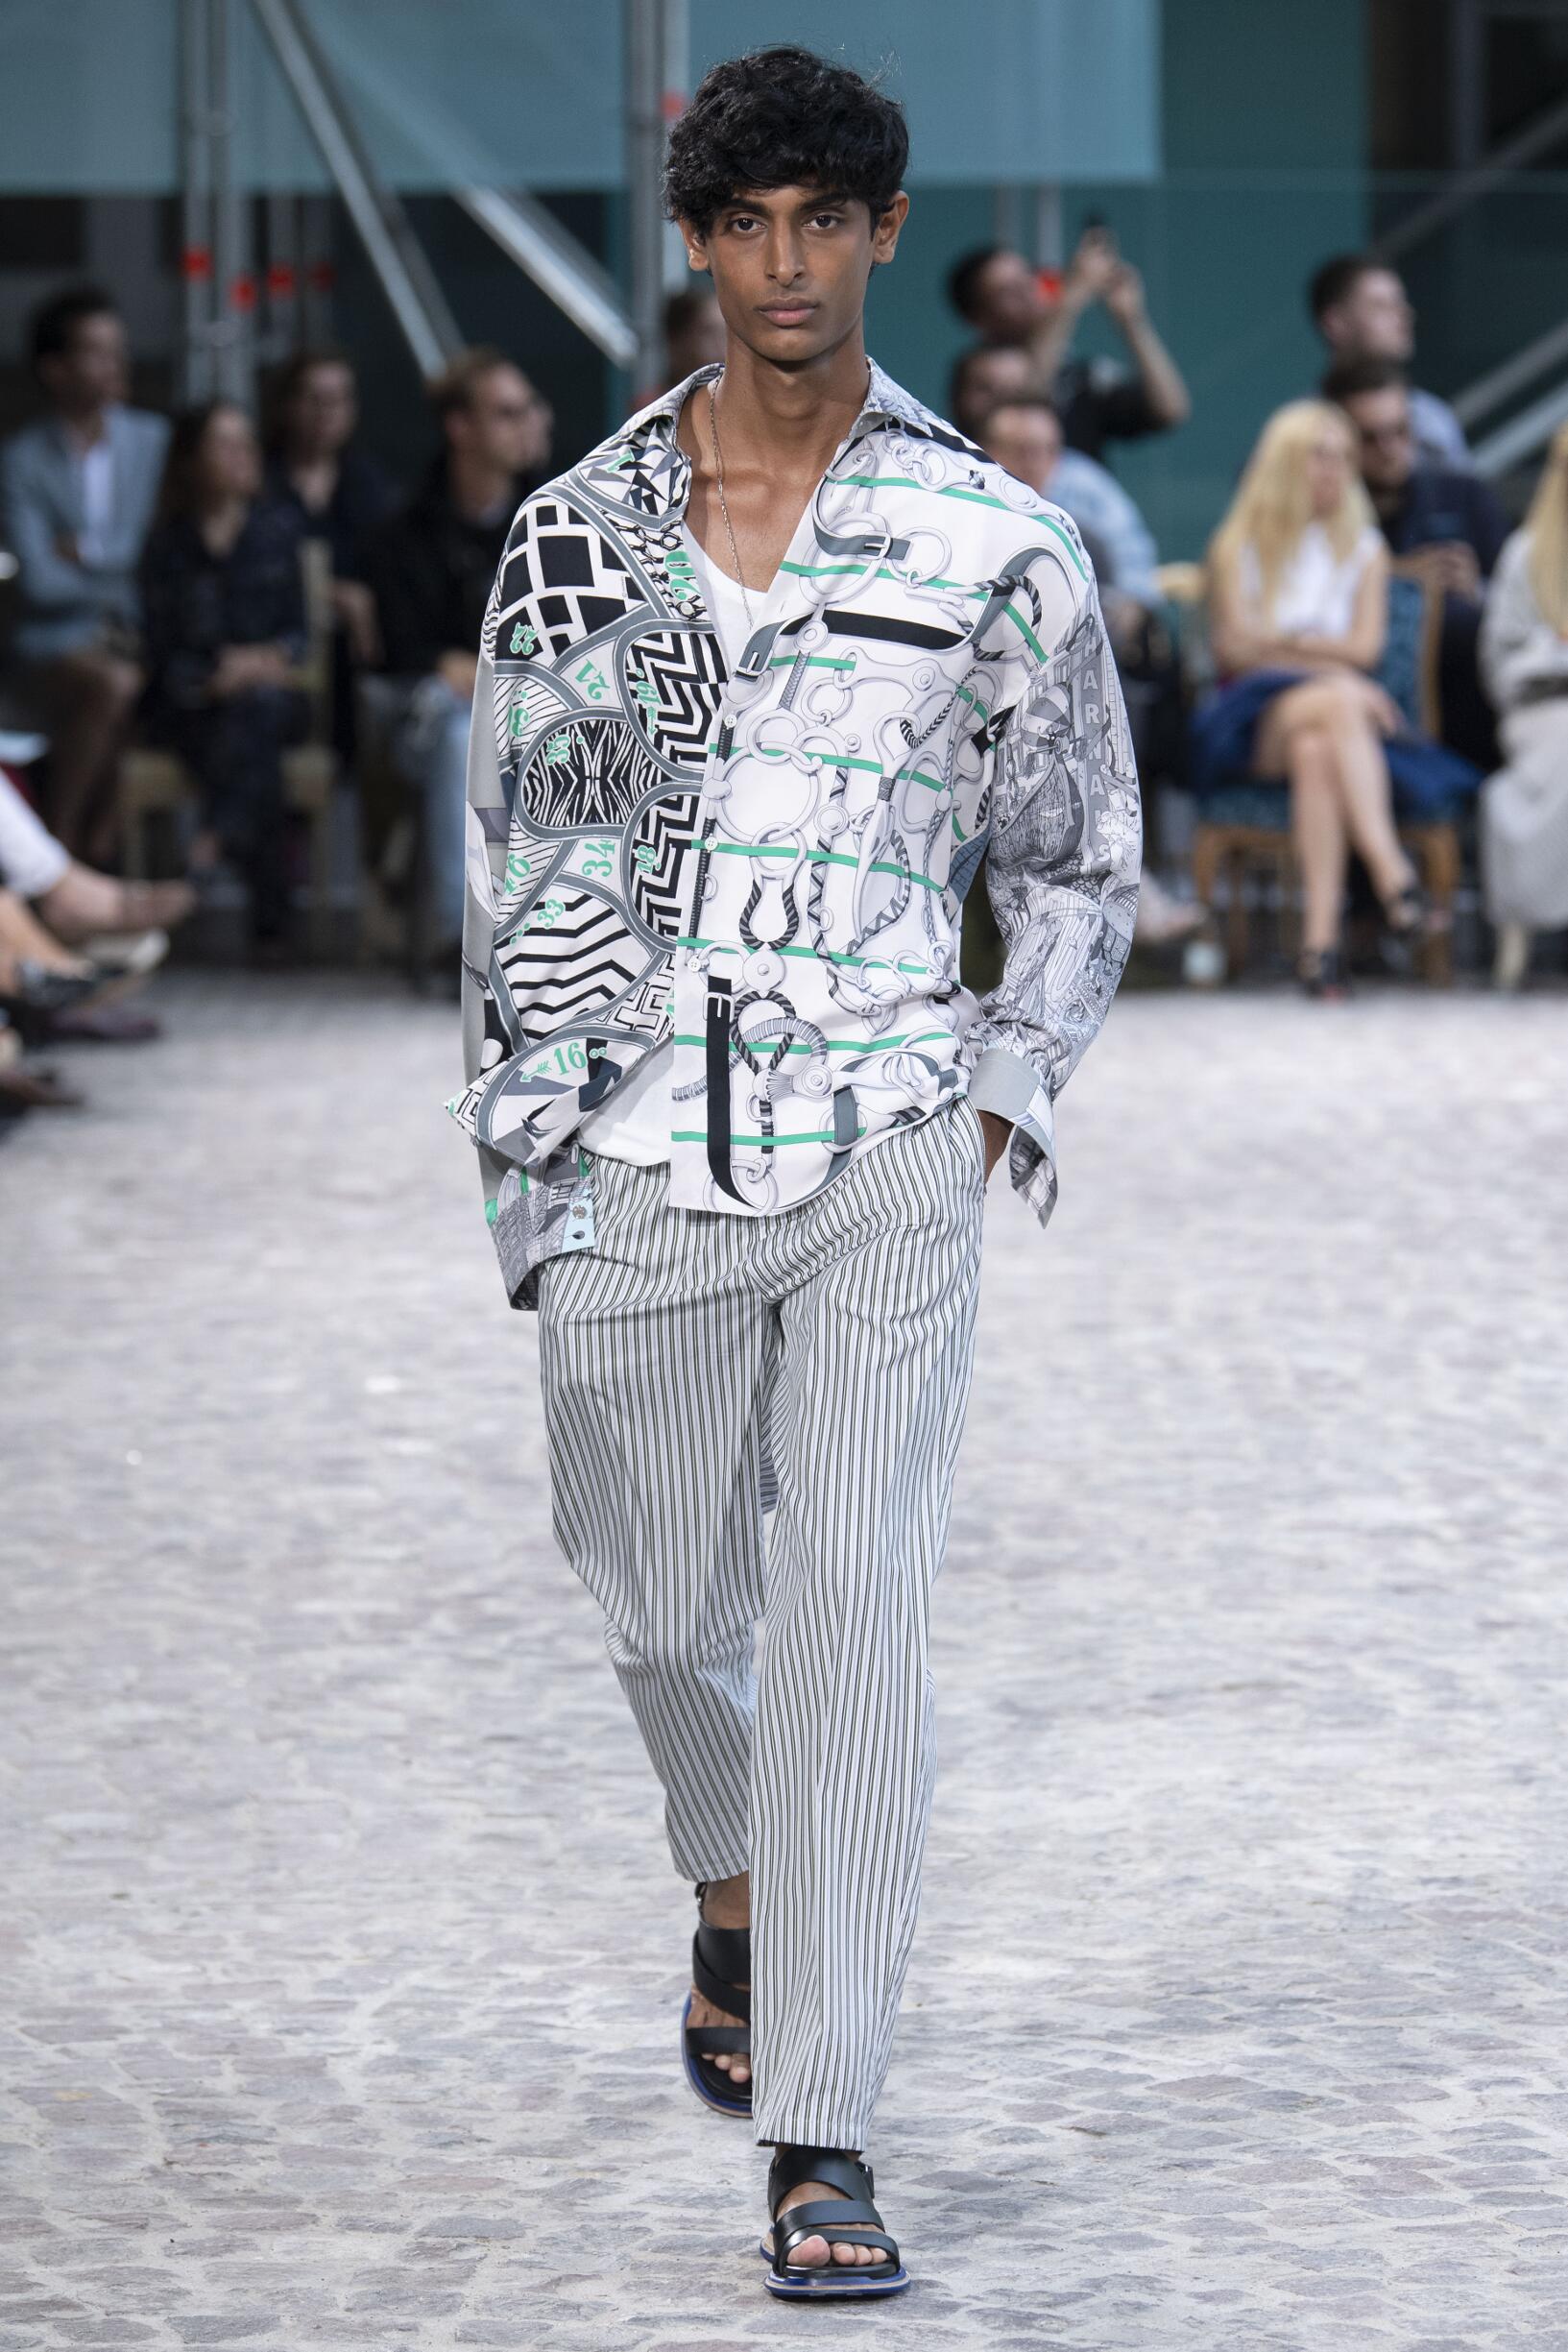 HERMÈS SPRING SUMMER 2020 MEN’S COLLECTION | The Skinny Beep